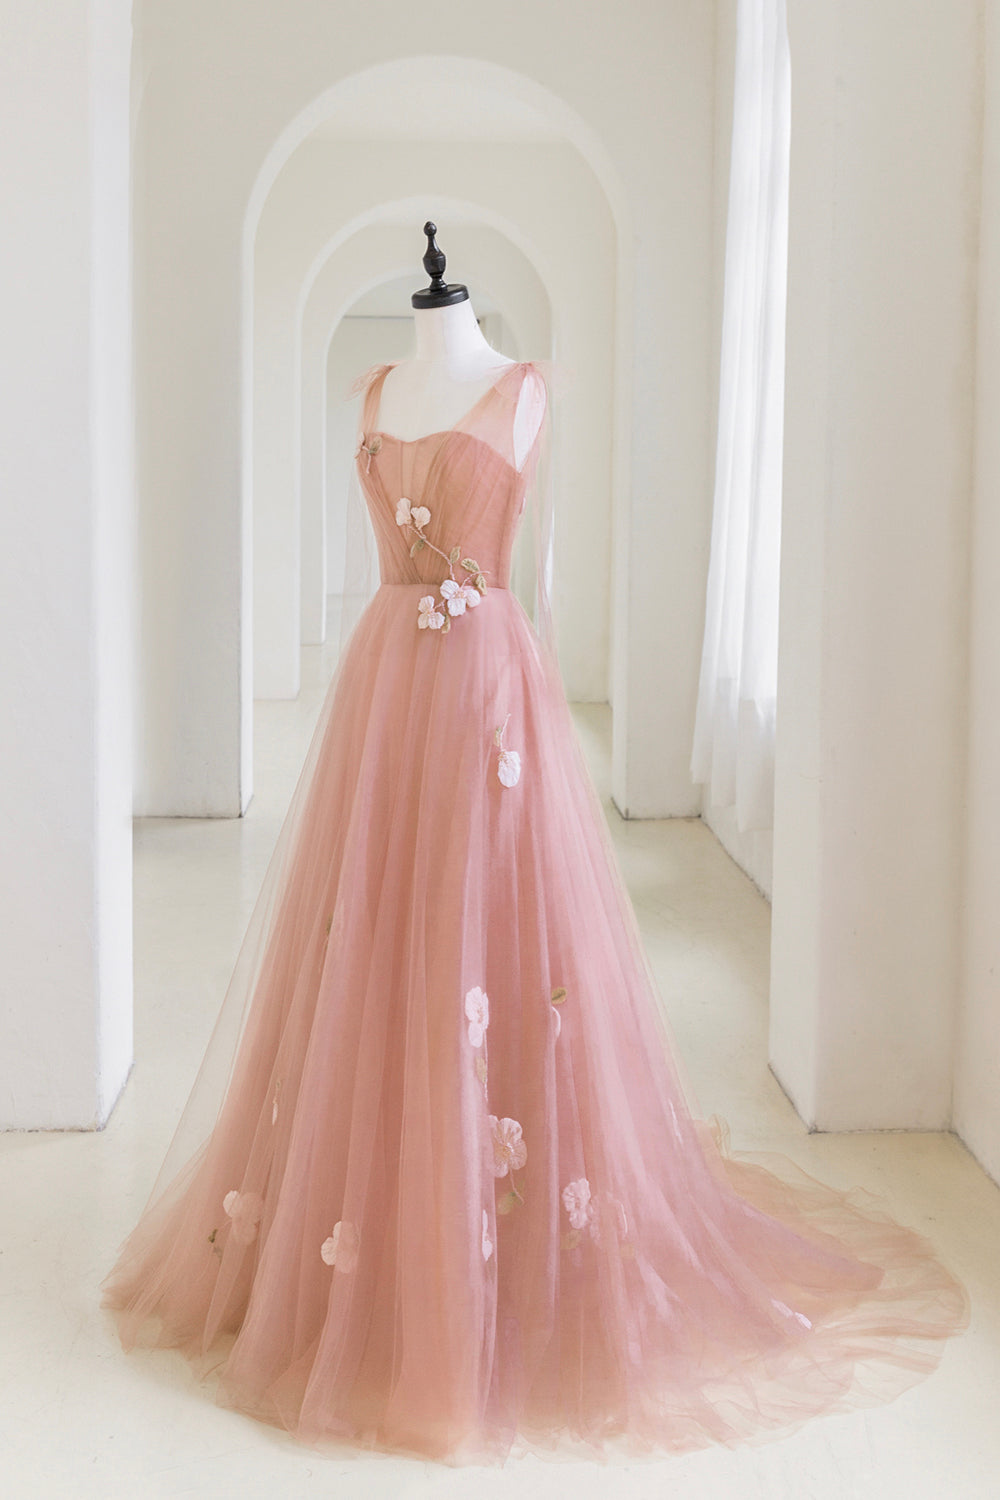 Pink Tulle Long A-Line Prom Dress, Lovely Pink Evening Graduation Dress